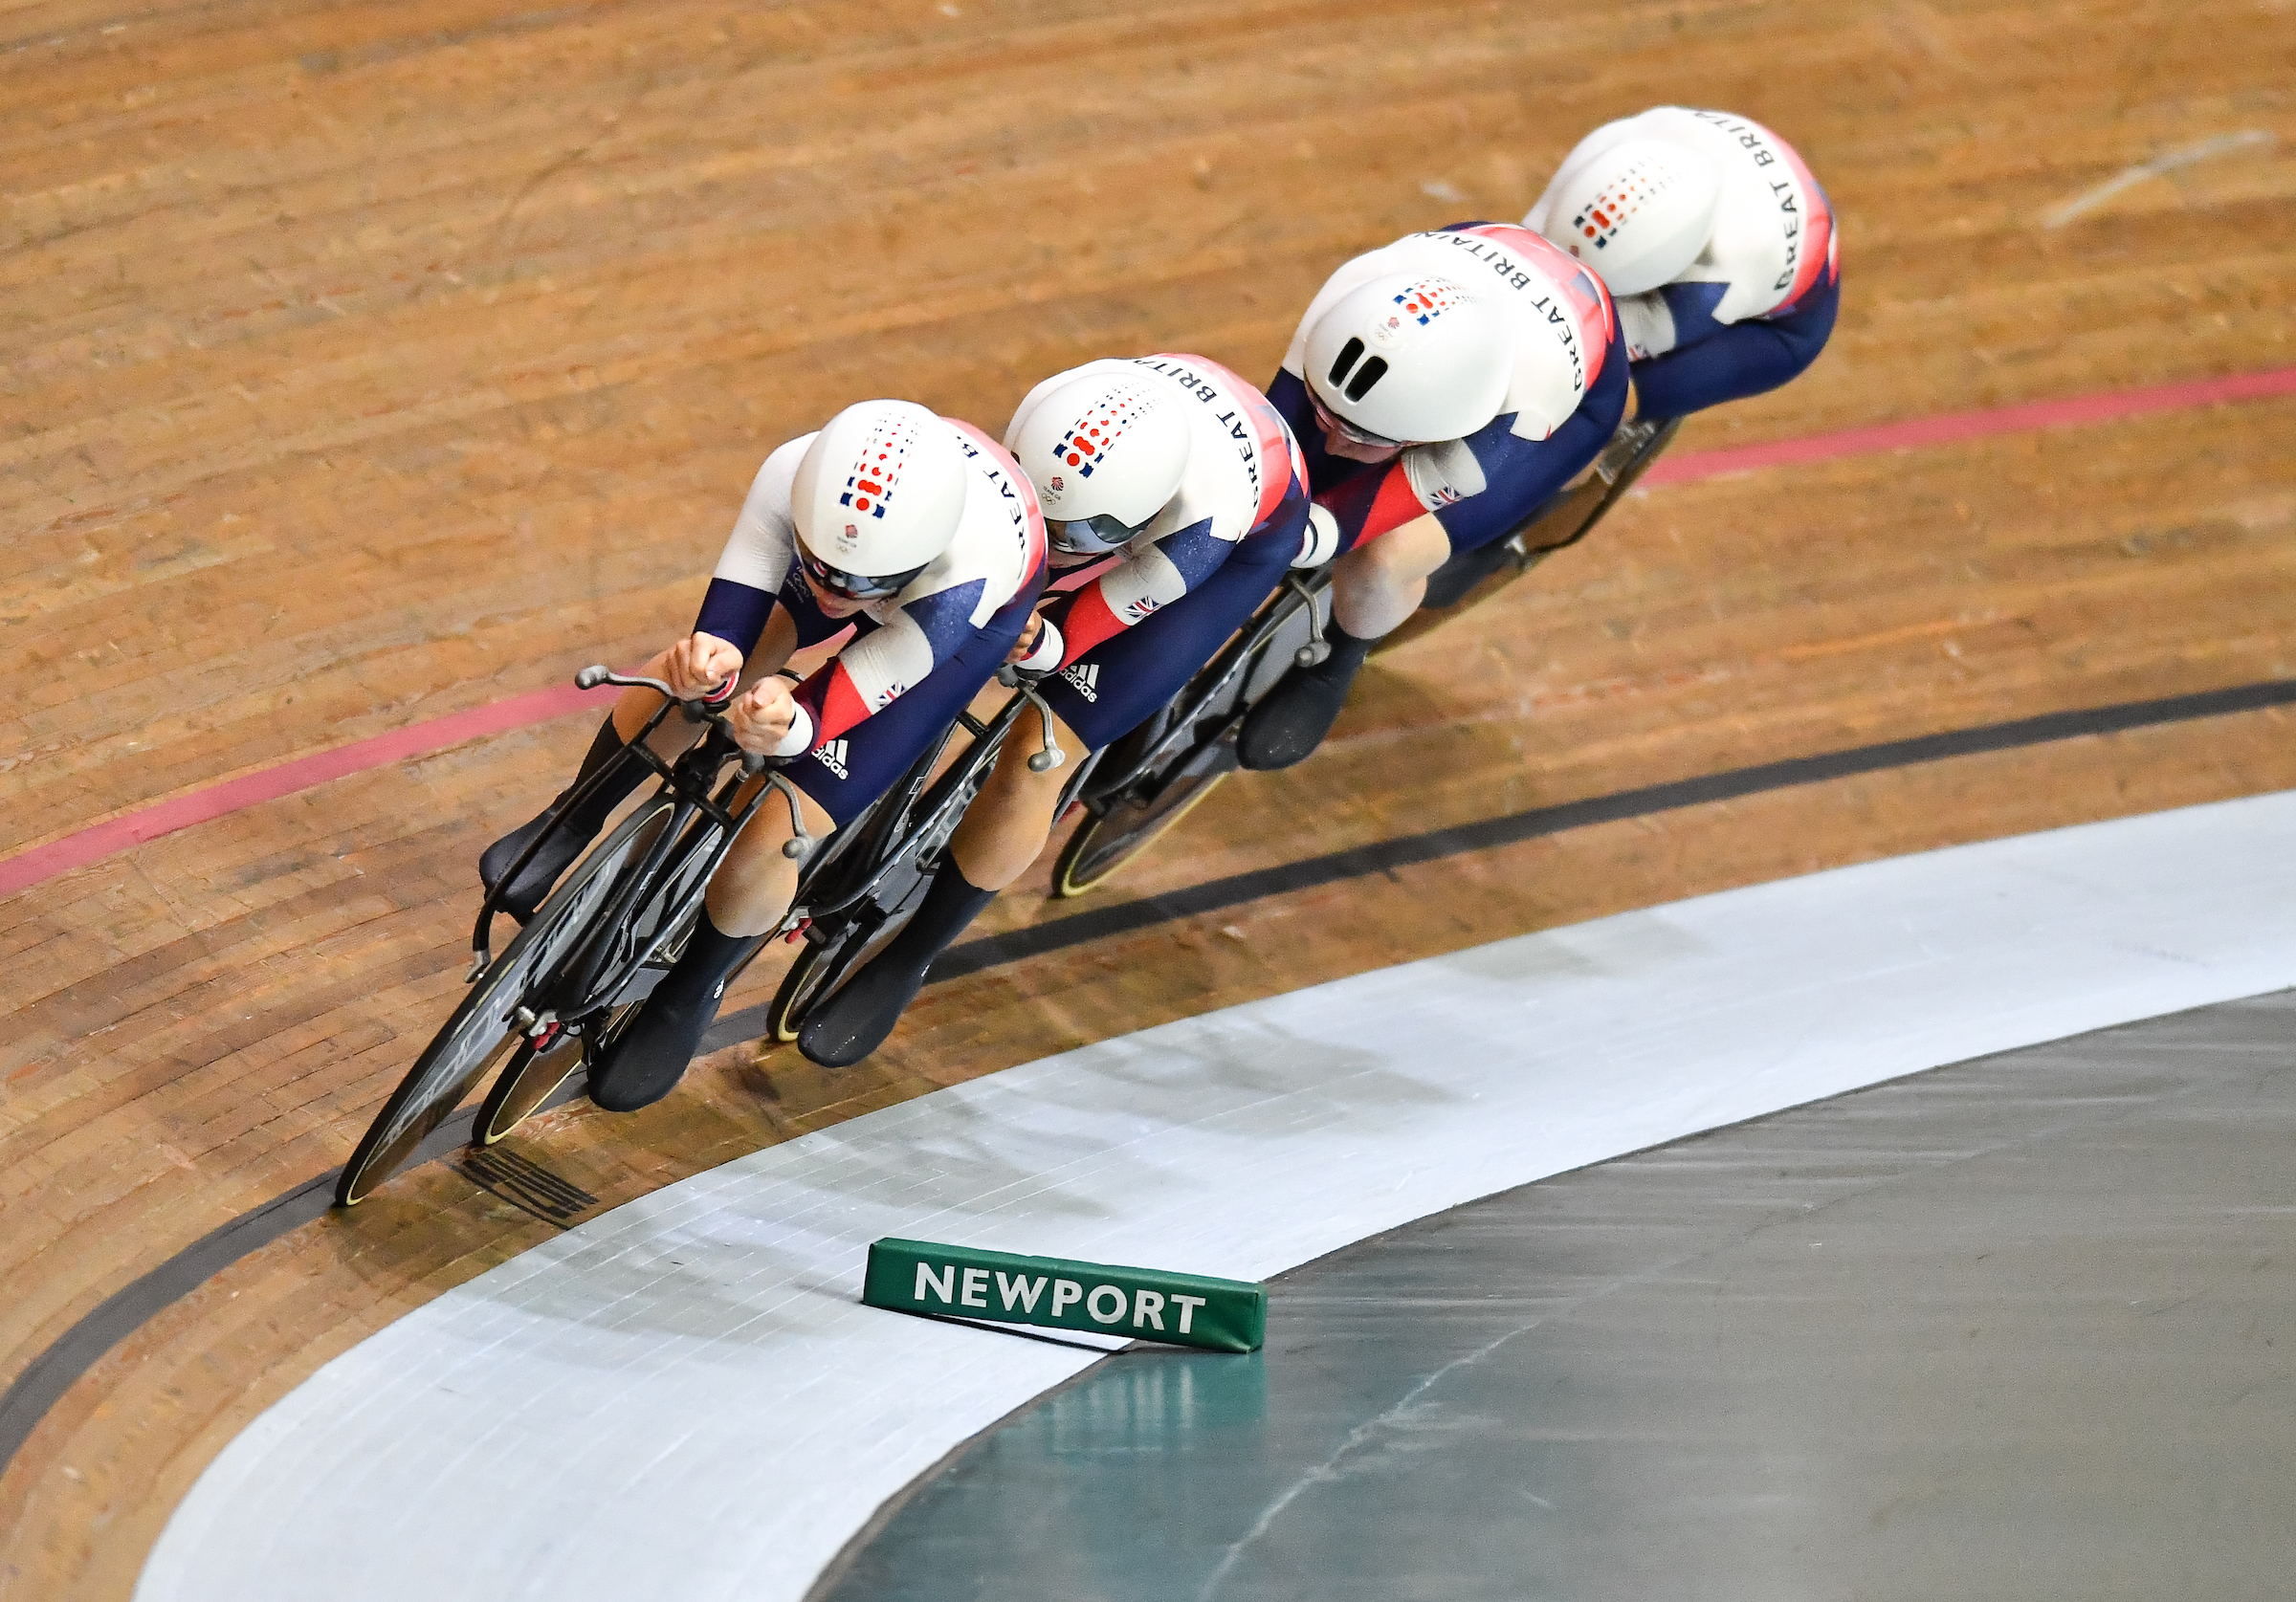 Picture by Will Palmer - Olympic Track Practice session and holding camp ahead of the 2020 Tokyo Olympics - Newport, Wales - Laura Kenny, Katie Archibald, Elinor Barker and Neah Evans on track.JPG